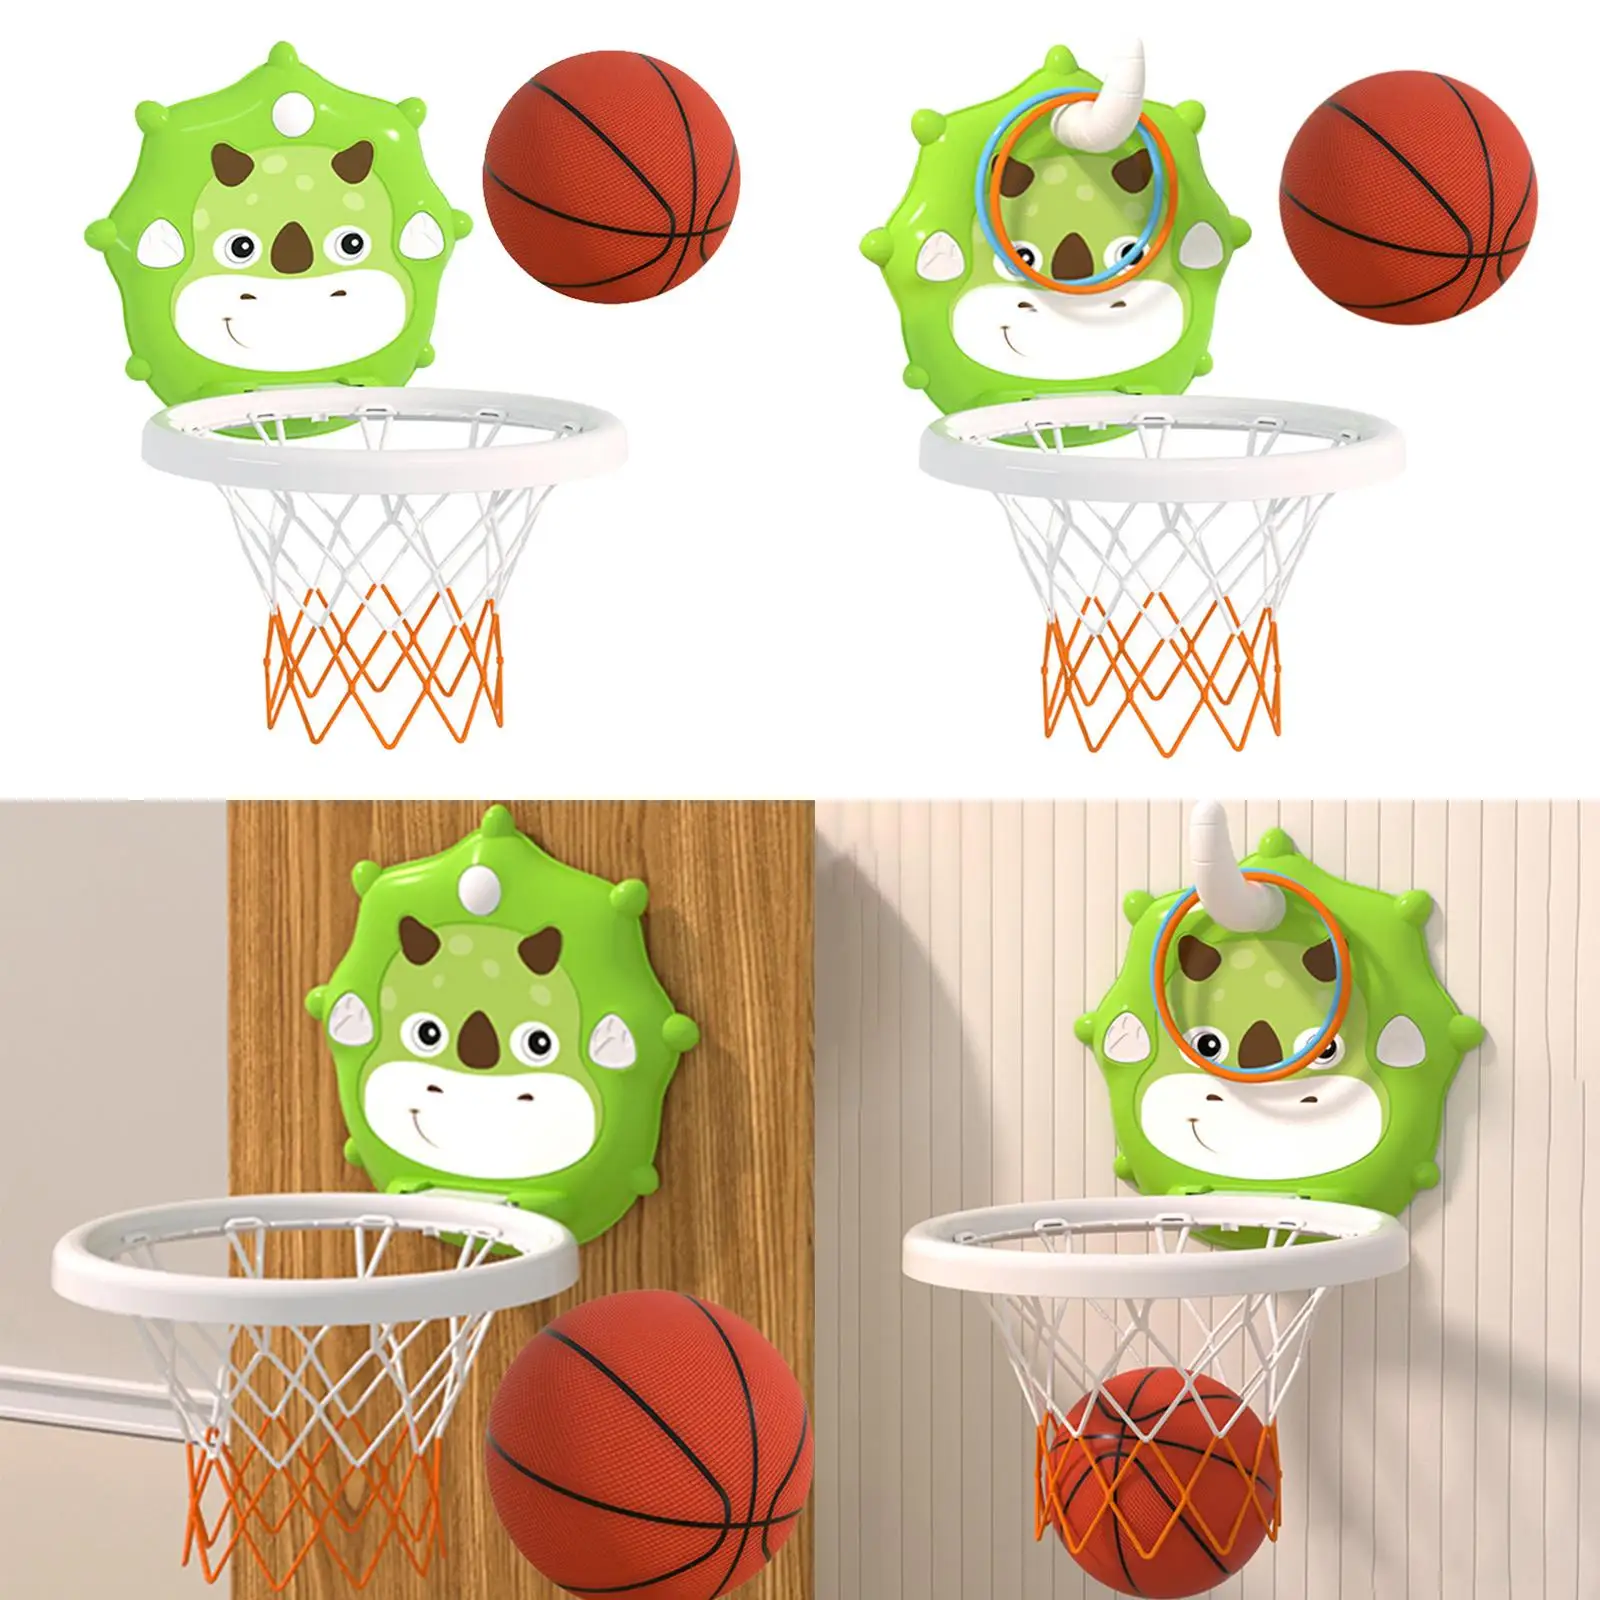 Wall Mount Basketball Toys with Balls Mini Basketball Hoop for Door Office Gifts